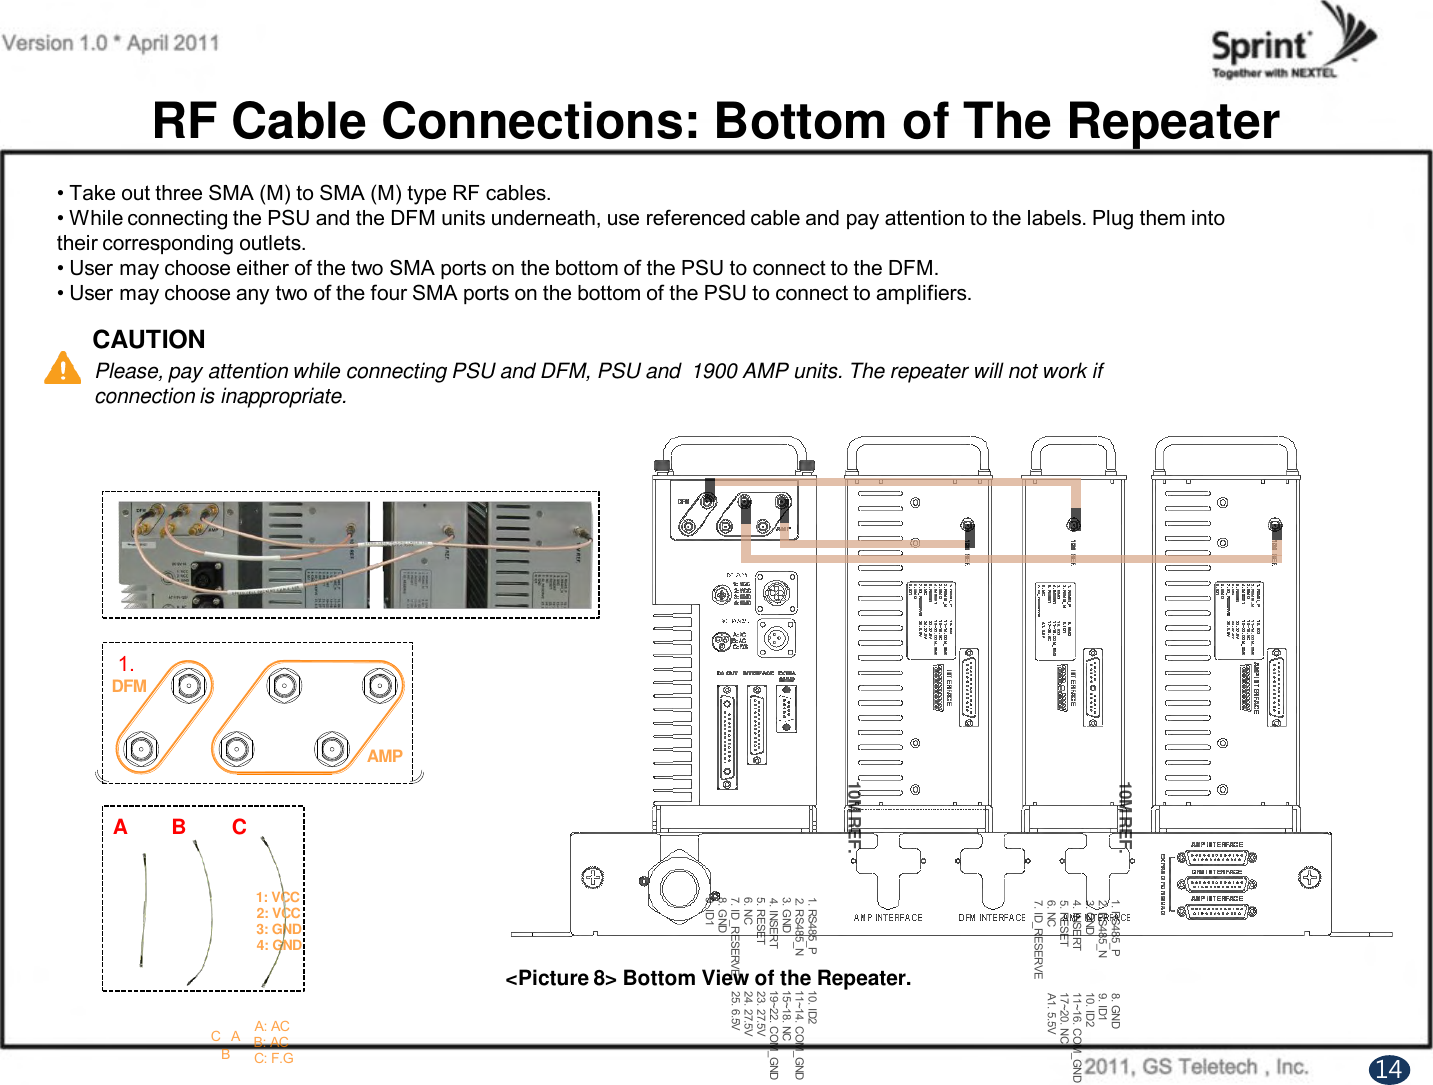 RF Cable Connections: Bottom of The Repeater• Take out three SMA (M) to SMA (M) type RF cables.• While connecting the PSU and the DFM units underneath, use referenced cable and pay attention to the labels. Plug them intotheir corresponding outlets.• User may choose either of the two SMA ports on the bottom of the PSU to connect to the DFM.• User may choose any two of the four SMA ports on the bottom of the PSU to connect to amplifiers.CAUTIONPlease, pay attention while connecting PSU and DFM, PSU and  1900 AMP units. The repeater will not work if  connection is inappropriate. &lt;Picture 8&gt; Bottom View of the Repeater.1410M REF.13 12 11 10 9 7 6 5 4 3 2 114151617181920821222324251. RS485_P2. RS485_N3. GND4. INSERT5. RESET6. NC7. ID_RESERVE8. GND9. ID110. ID211~14. COM_GND15~18. NC19~22. COM_GND23. 27.5V24. 27.5V25. 6.5VINTERFACE10M REF.13 12 11 10 9 7 6 5 432 114151617181920821222324251. RS485_P2. RS485_N3. GND4. INSERT5. RESET6. NC7. ID_RESERVE8. GND9. ID110. ID211~14. COM_GND15~18. NC19~22. COM_GND23. 27.5V24. 27.5V25. 6.5VAMP INTERFACE10M REF.10 9 7 6 5 432 11112161718192081. RS485_P2. RS485_N3. GND4. INSERT5. RESET6. NC7. ID_RESERVE8. GND9. ID110. ID211~16. COM_GND17~20. NCA1. 5.5VINTERFACE1415 13A1C AB1: VCC2: VCC3: GND4: GNDINTERFACE EXTRASNMPA: ACB: ACC: F.GDC OUTDFMAMPAMP INTERFACEDFM INTERFACEAMP INTERFACEEXPAND FOR QUADAMP INTERFACE DFM INTERFACE AMP INTERFACE1.A B C